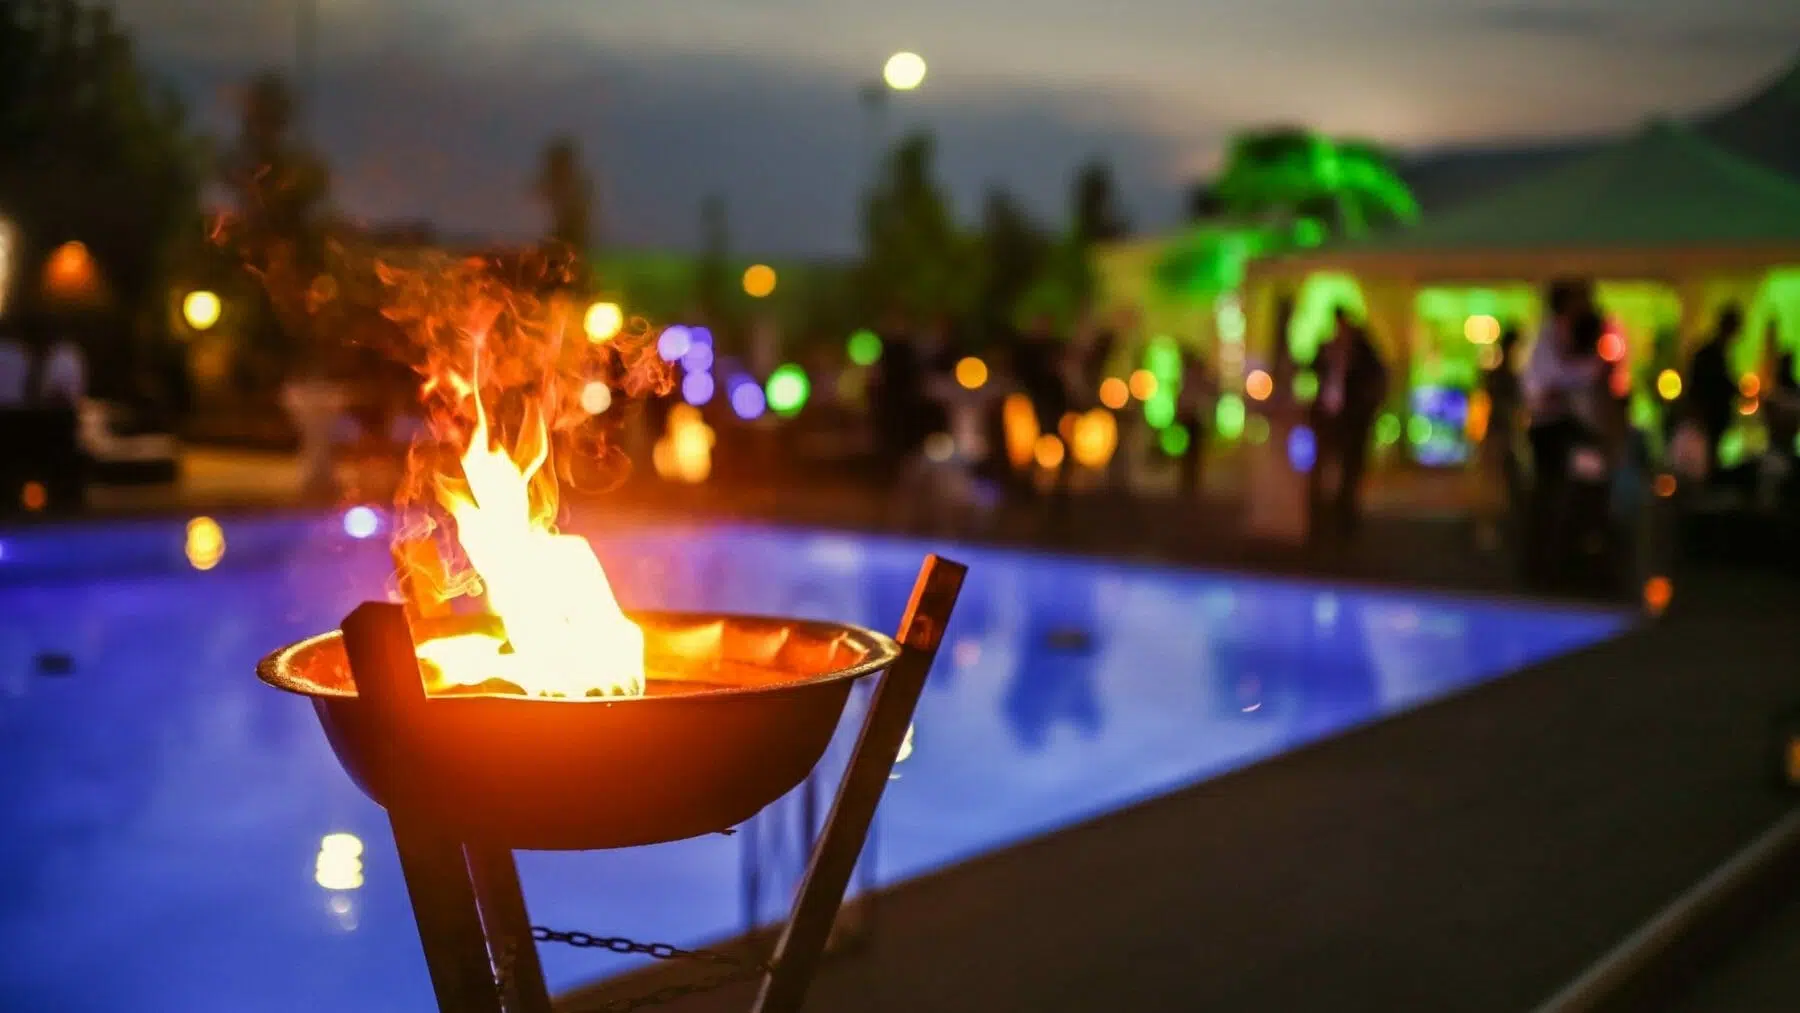 21 Ultimate Pool Party Ideas - Spaceships and Laser Beams